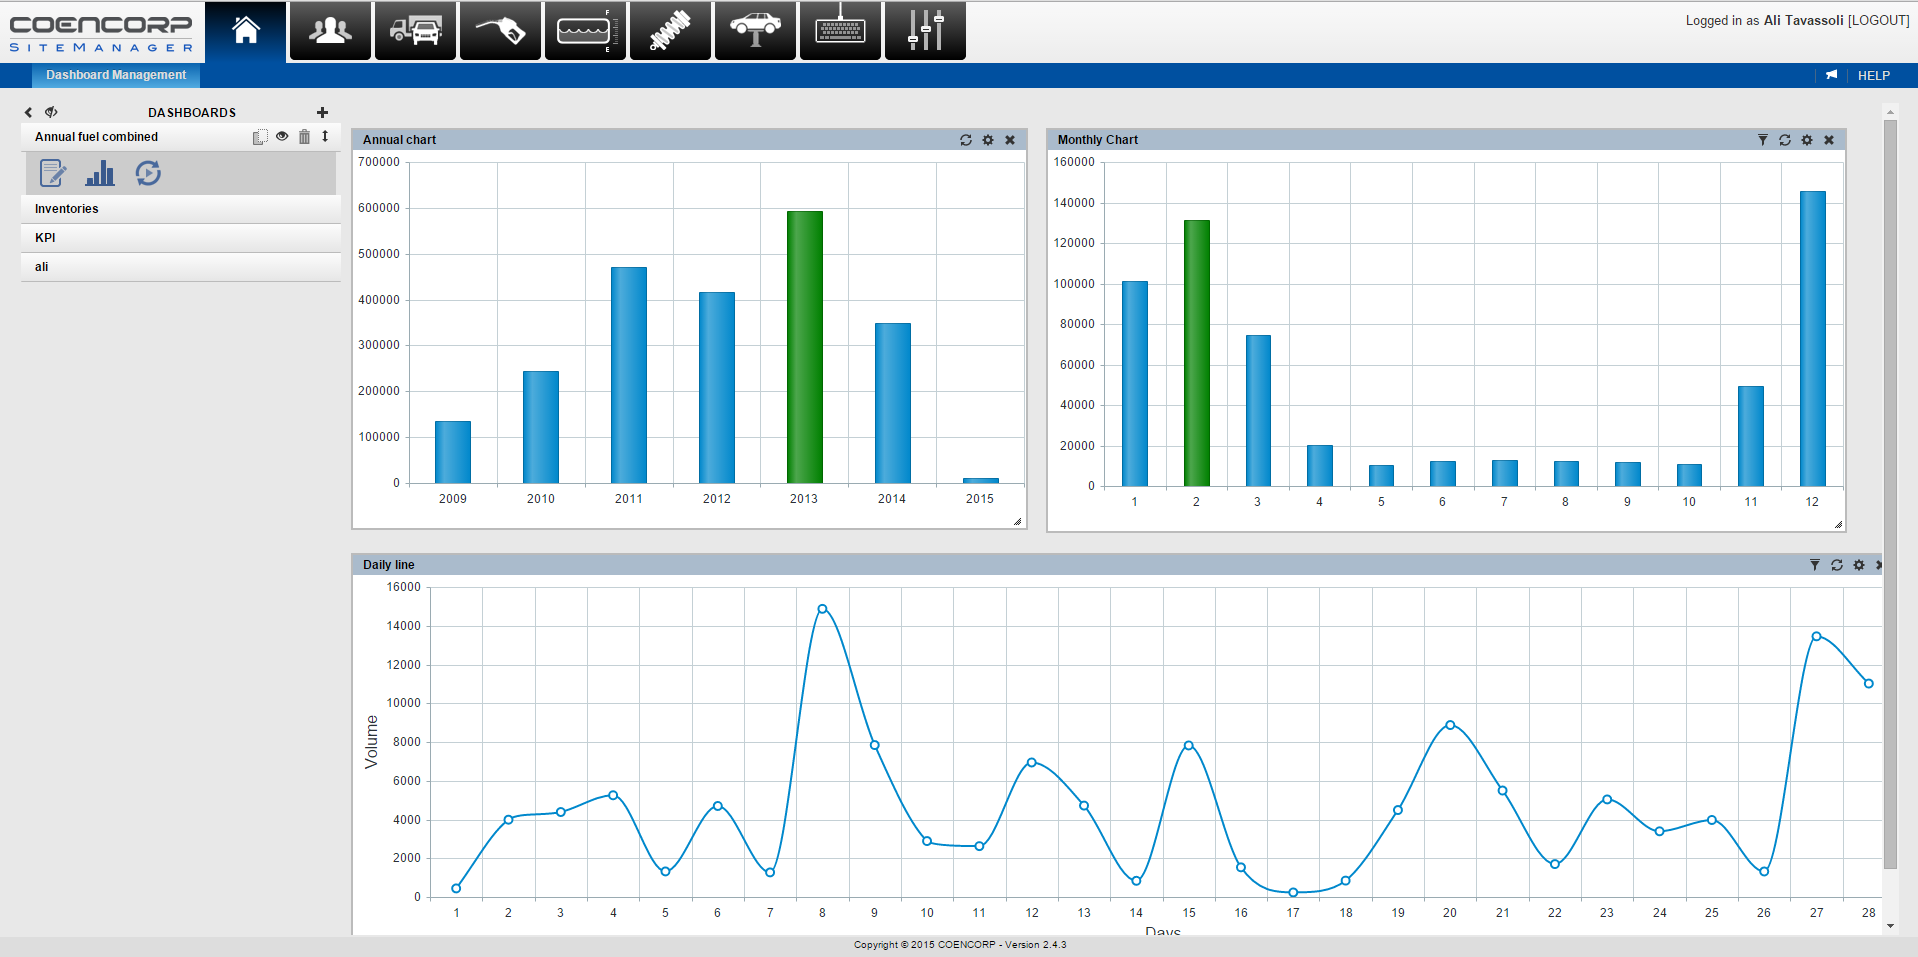 Dynamic Dashboard of Fuel Consumption Volumes